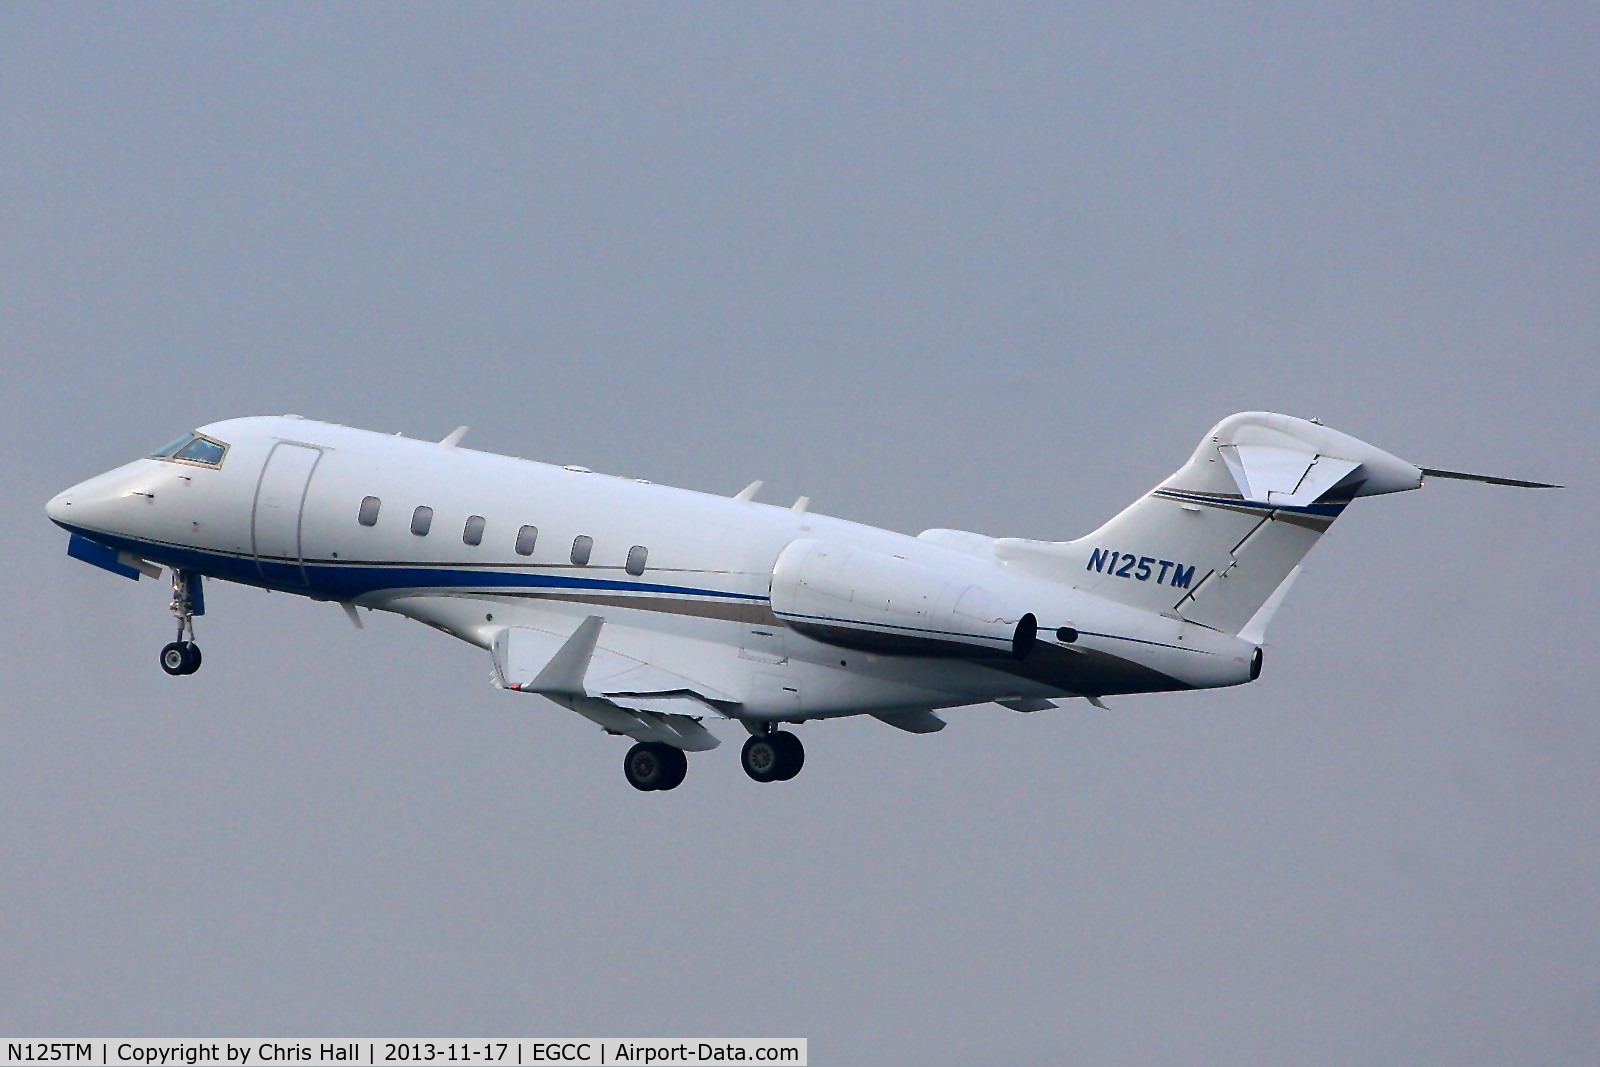 N125TM, 2006 Bombardier Challenger 300 (BD-100-1A10) C/N 20104, departing from RW23